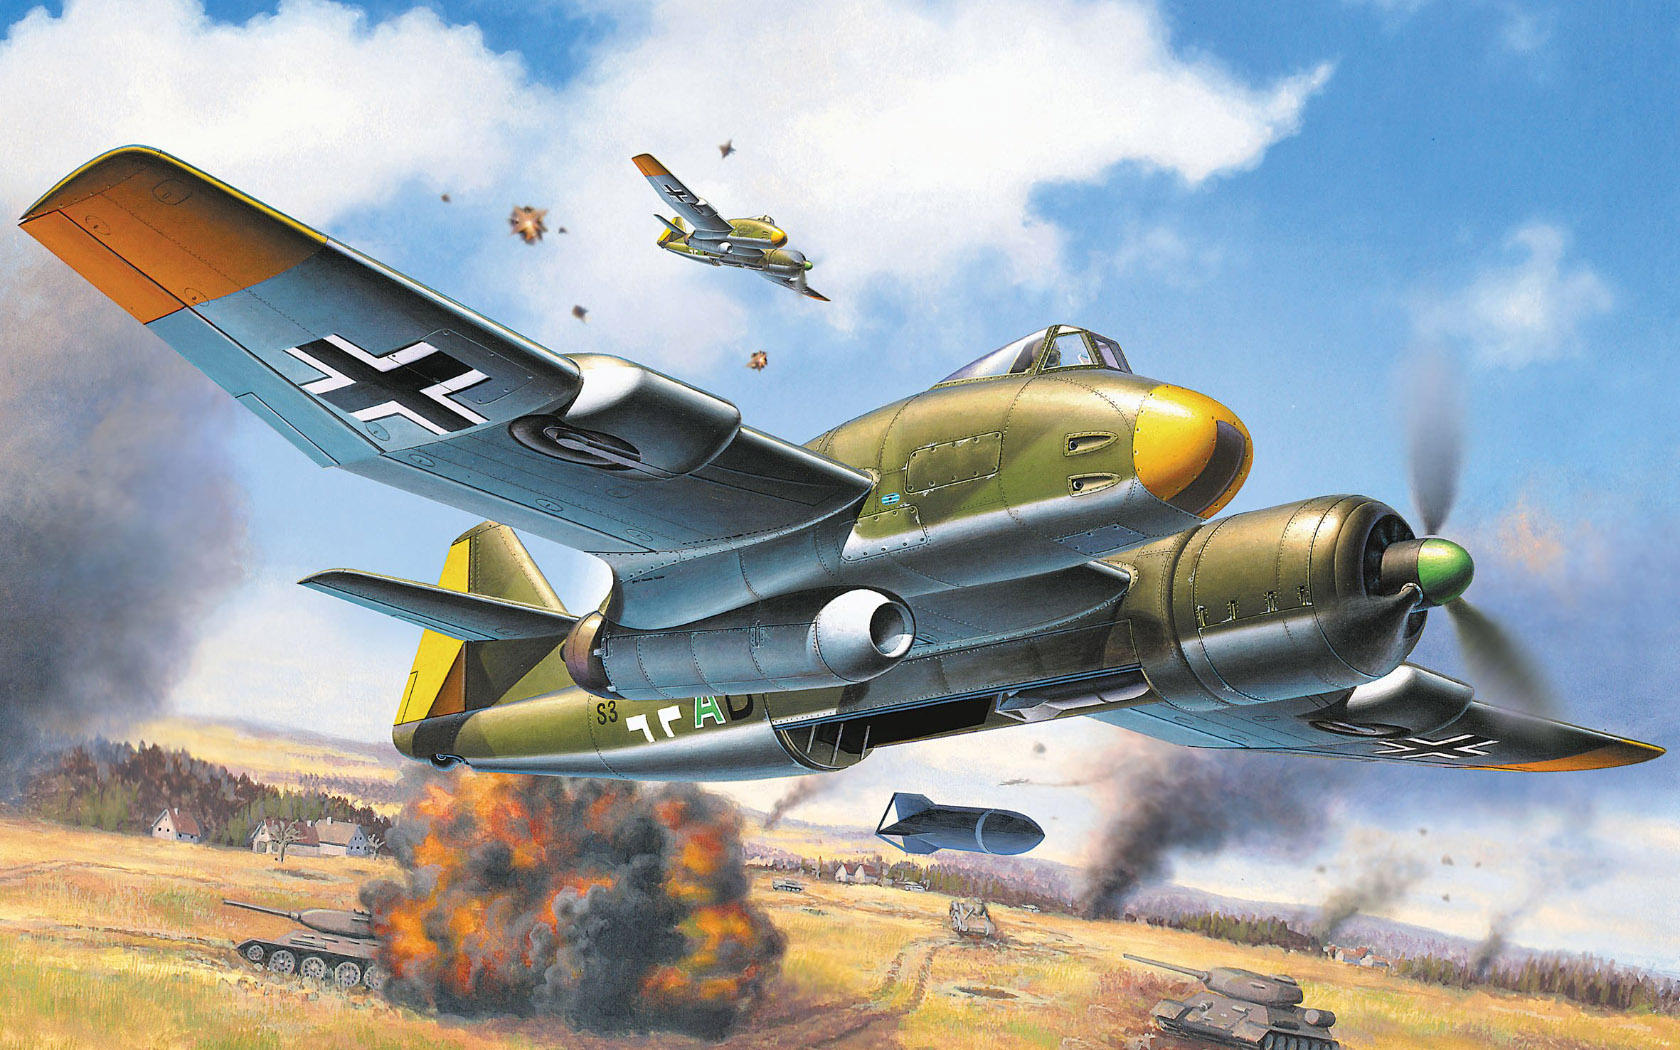 Aircraft War Flying Sky Army Military Blohm Voss P 194 Military Vehicle Artwork Clouds Explosion Mis 1680x1050